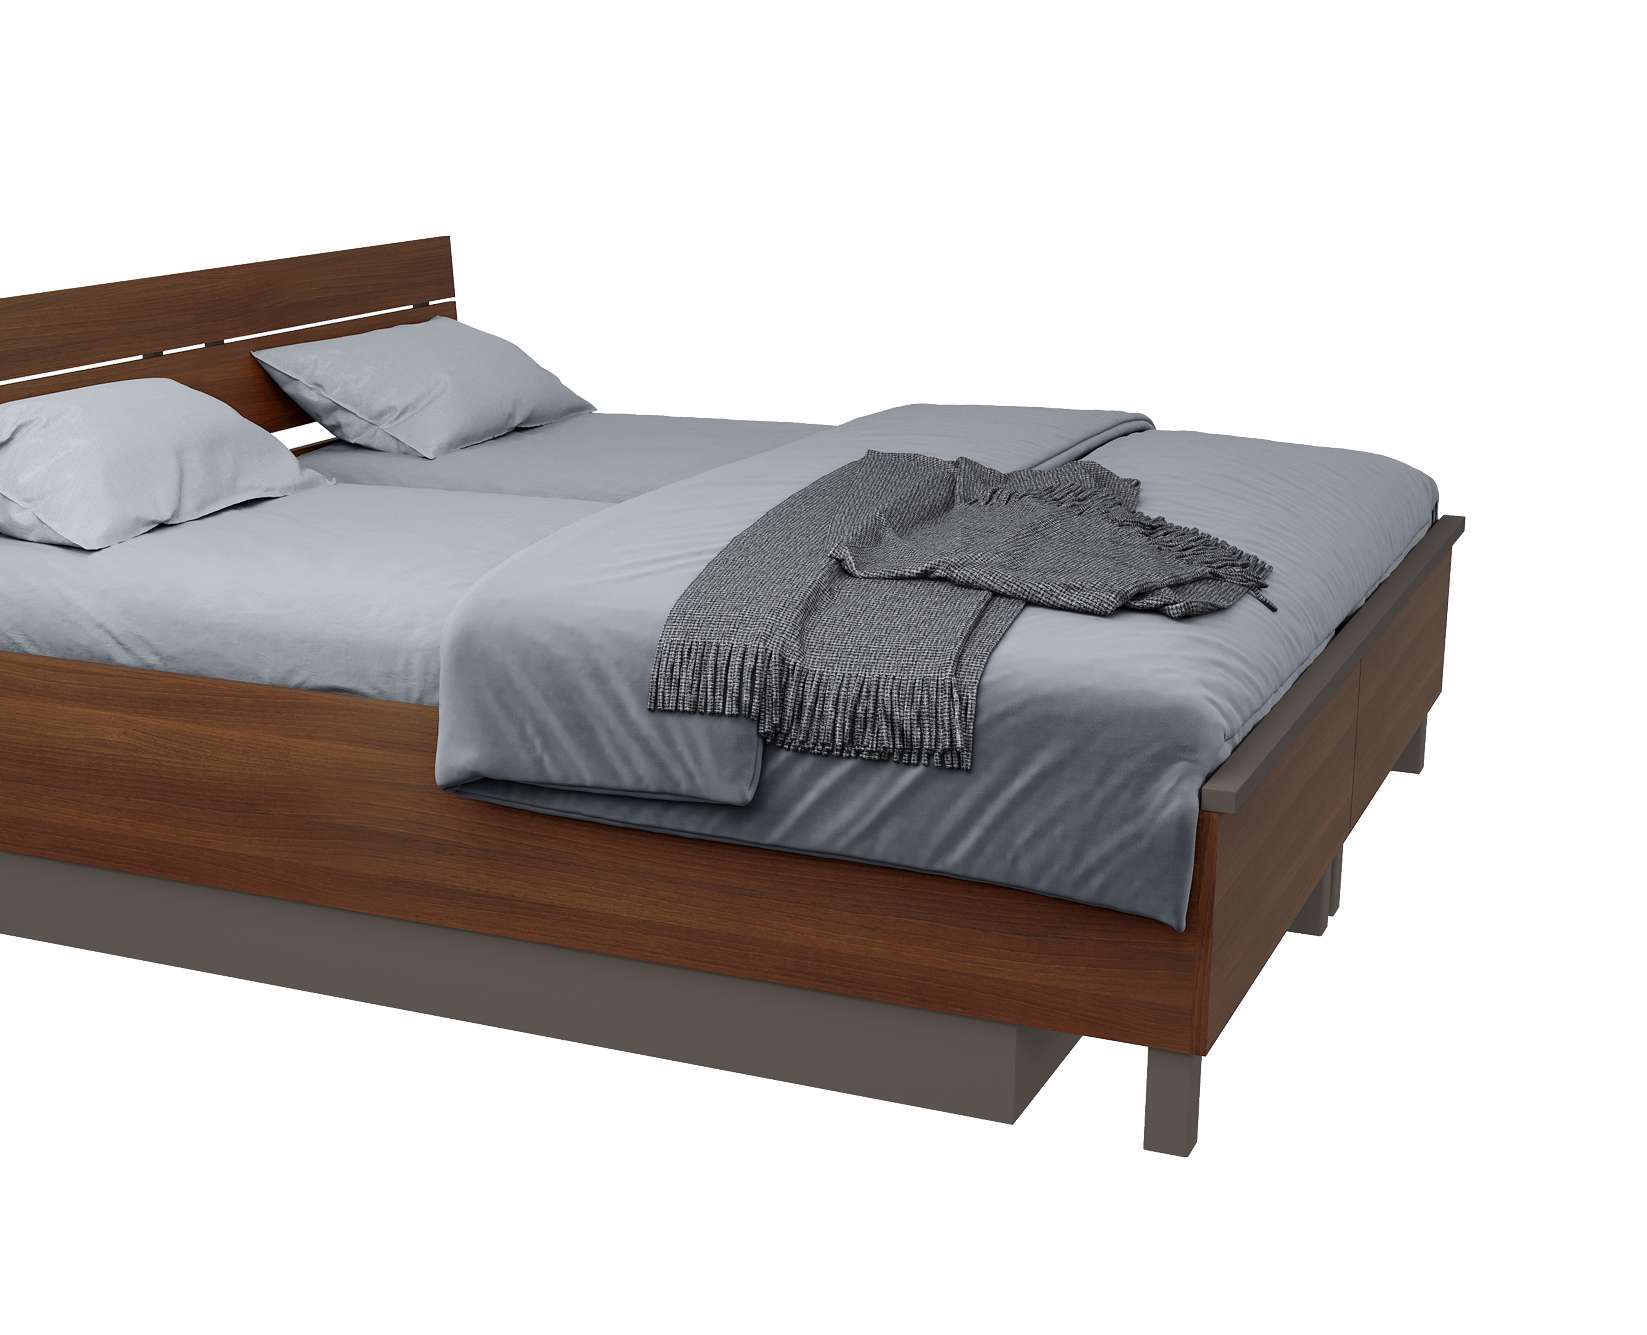 Relax bed frame in a double bed